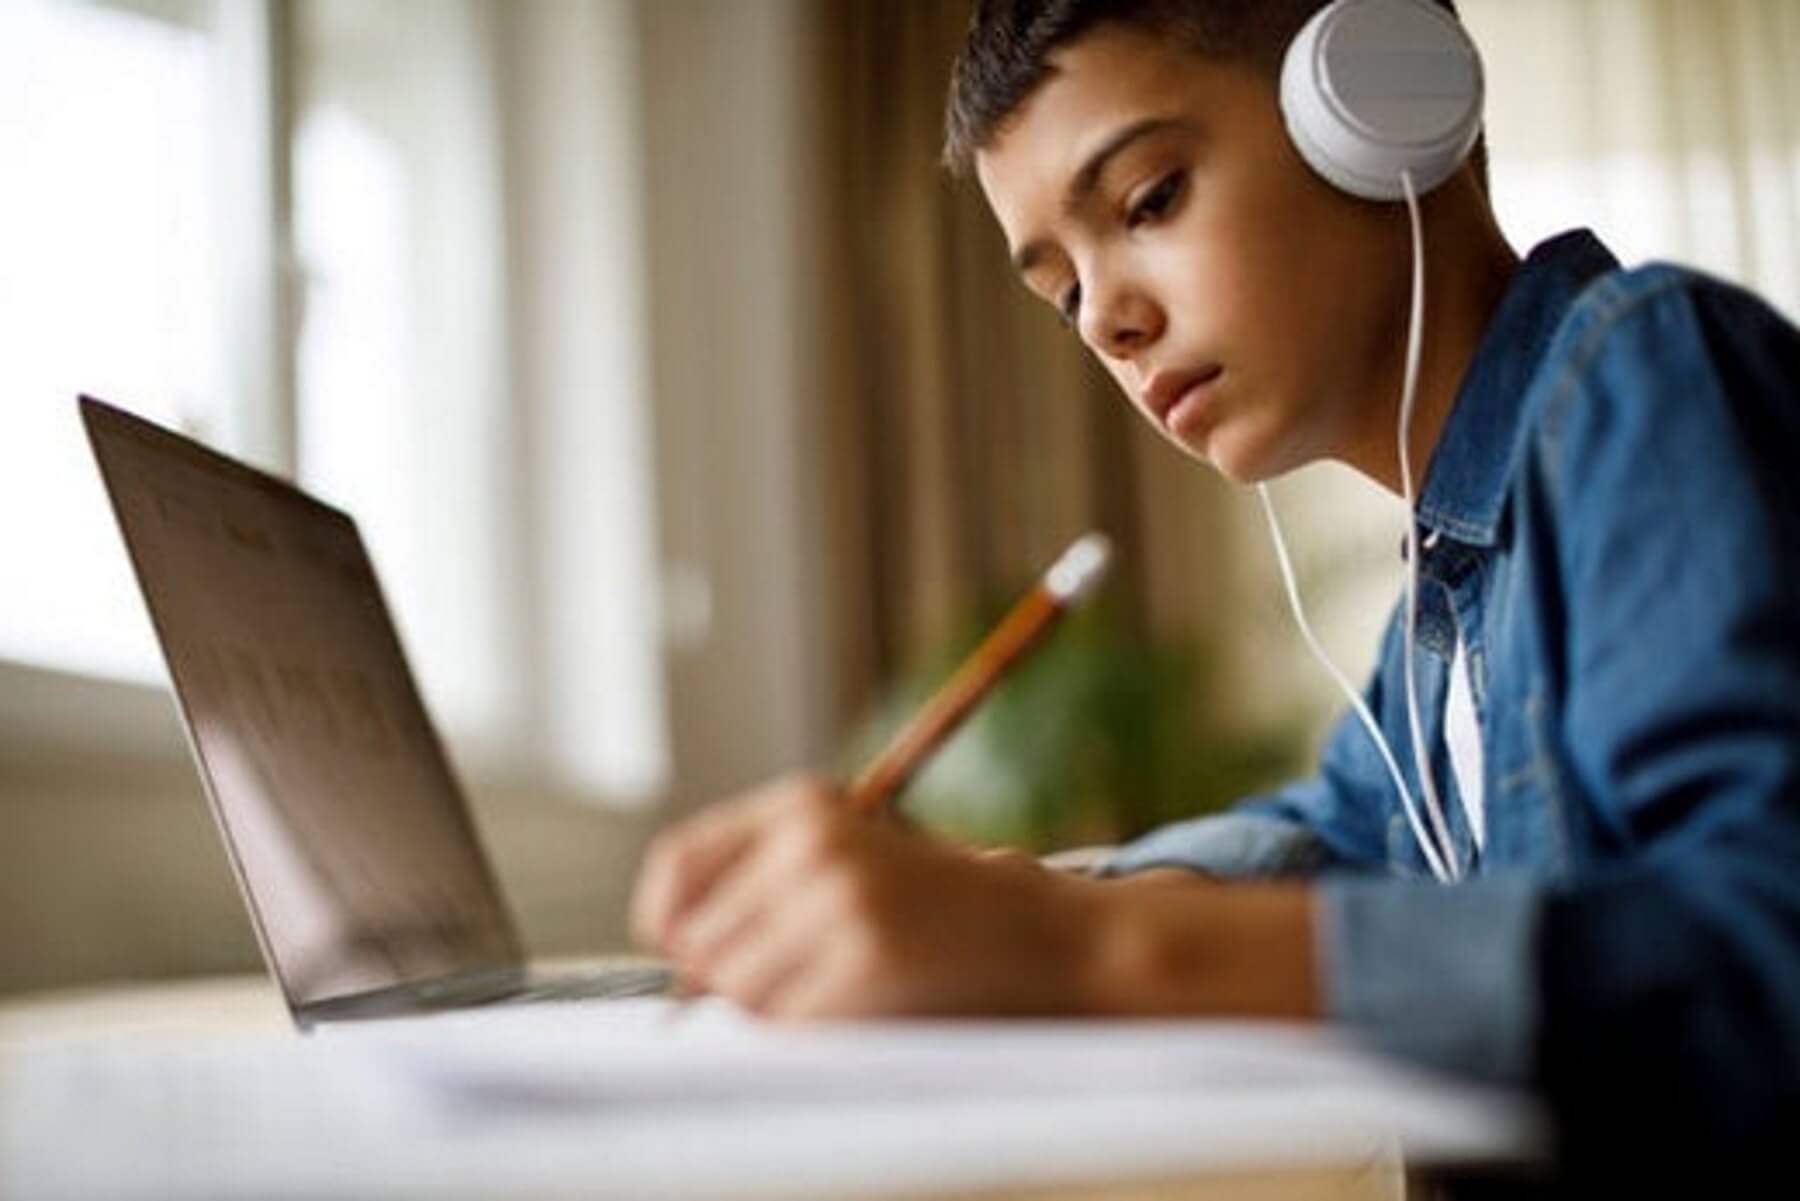 What are the best headphones for school? We've got you covered with our 6 easy tips that will help you wear headphon at school and still be able to focus on your work.